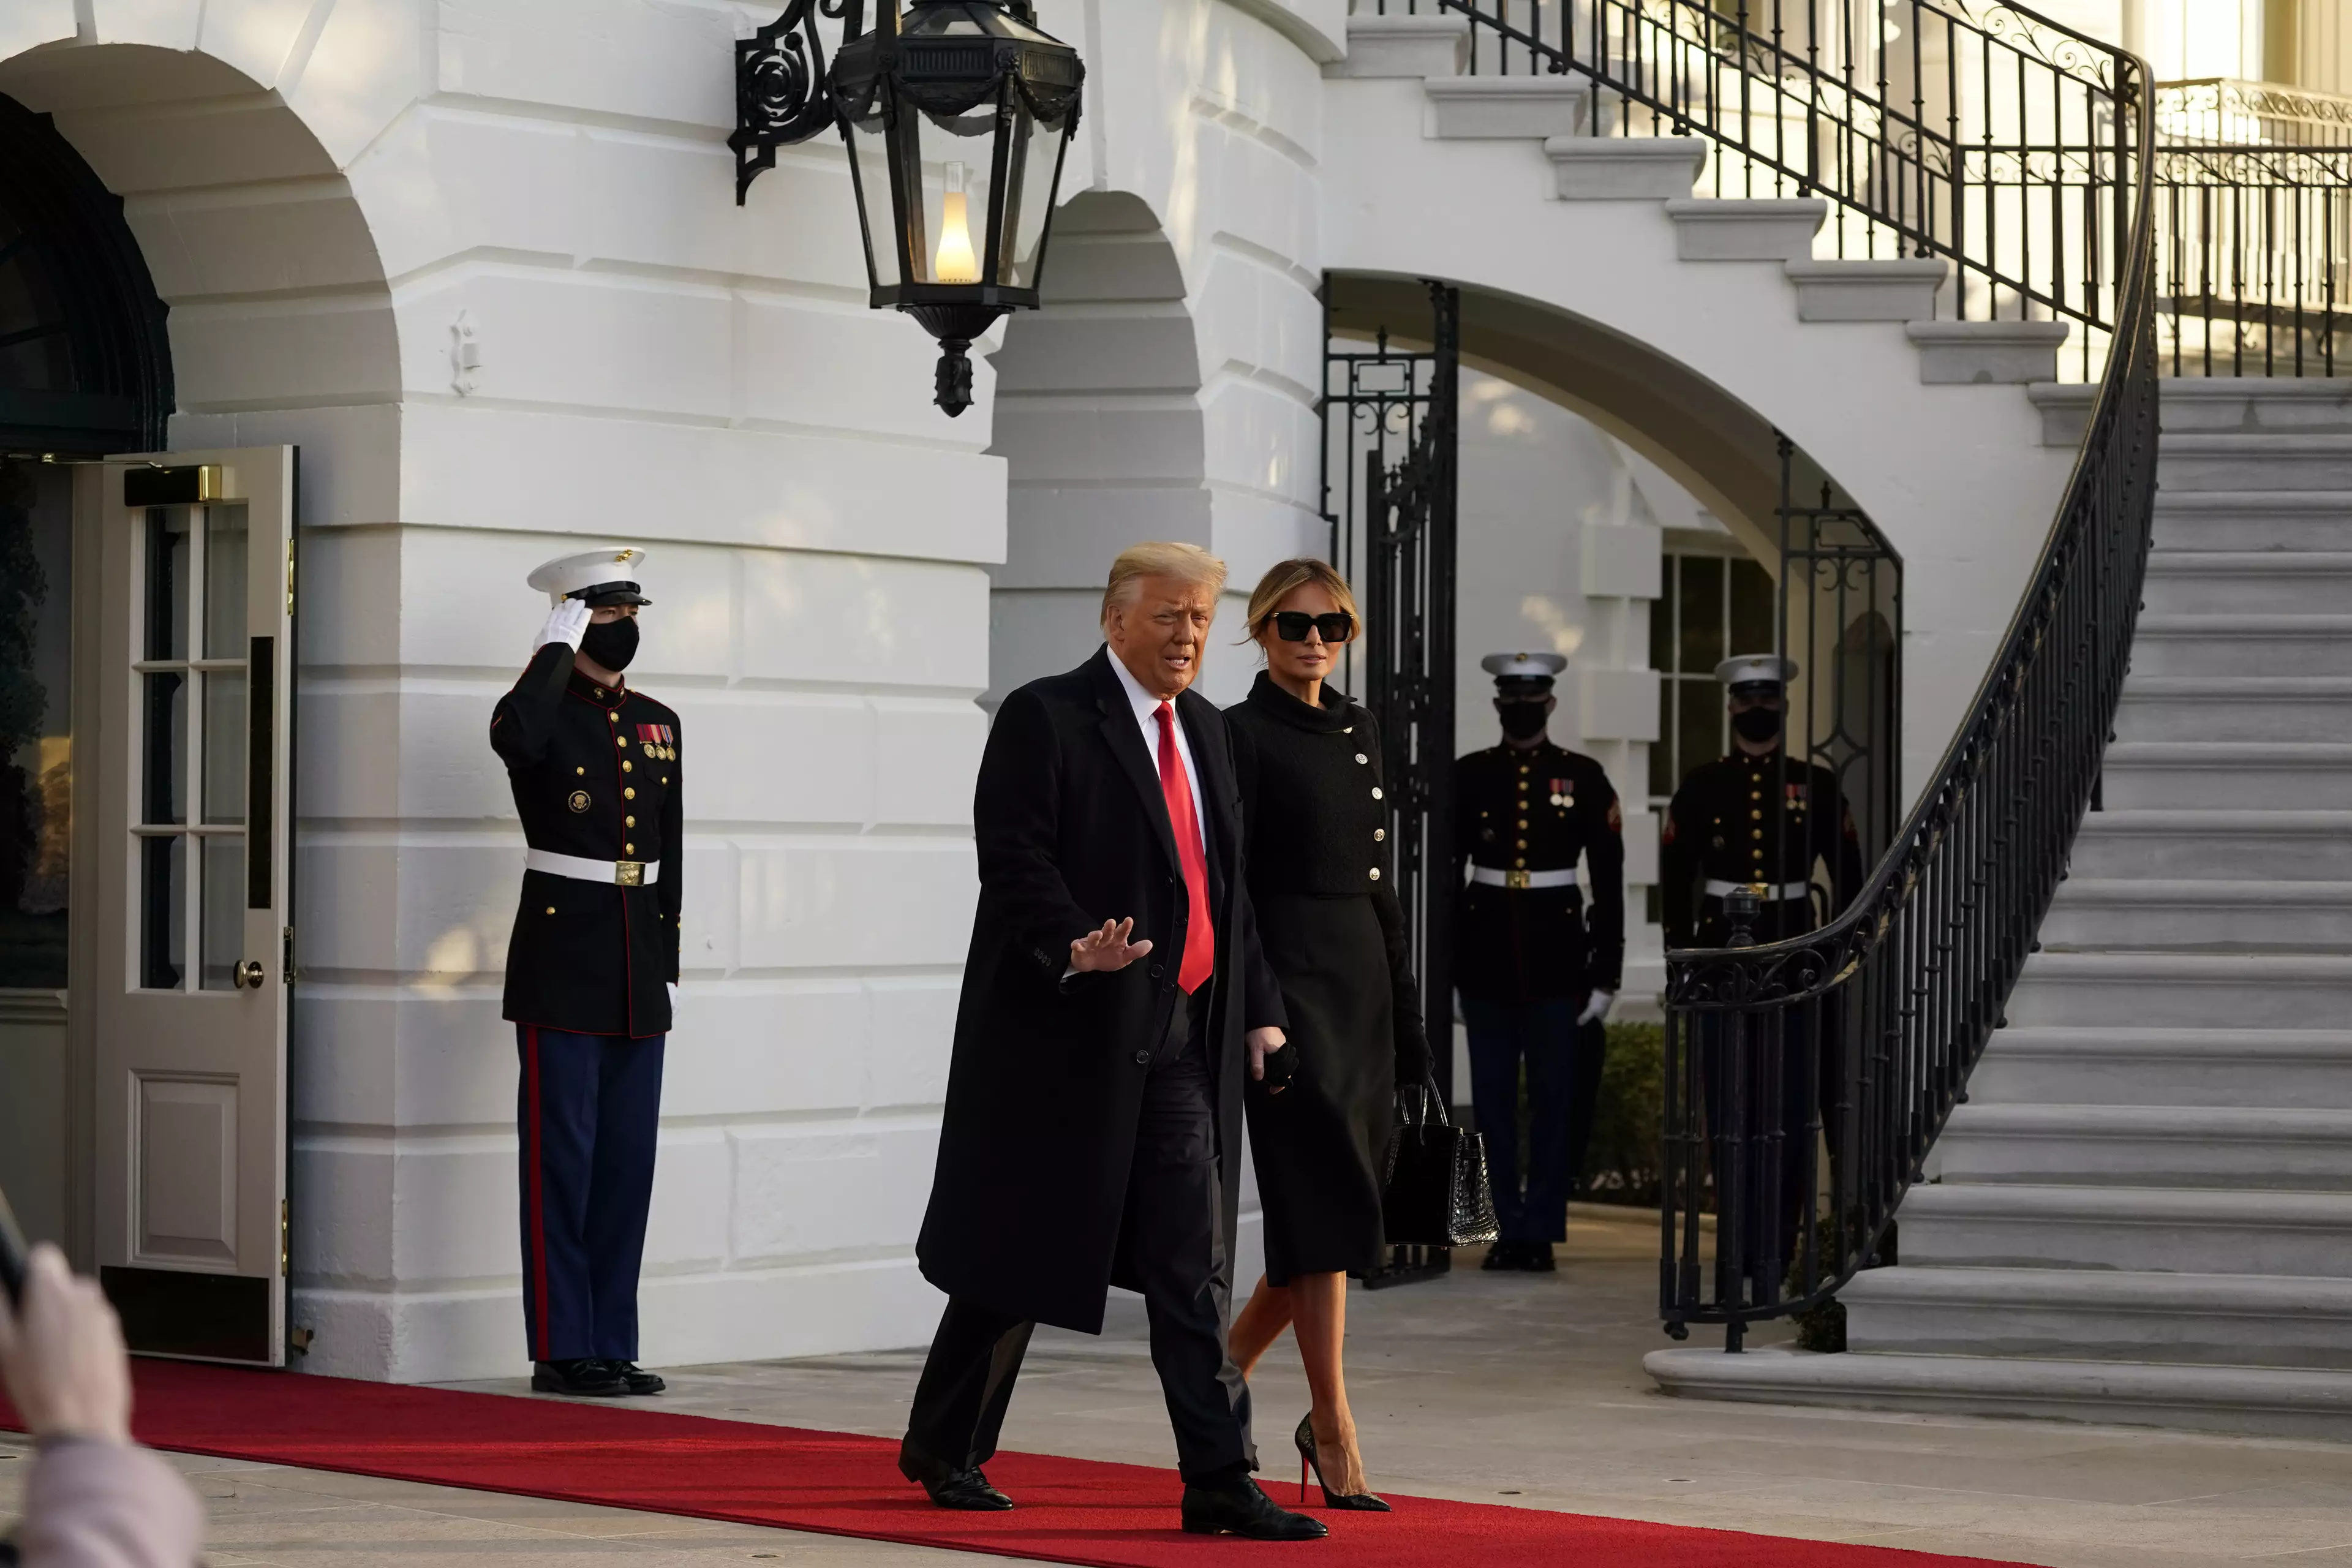 Trump leaving the White House for the final time.